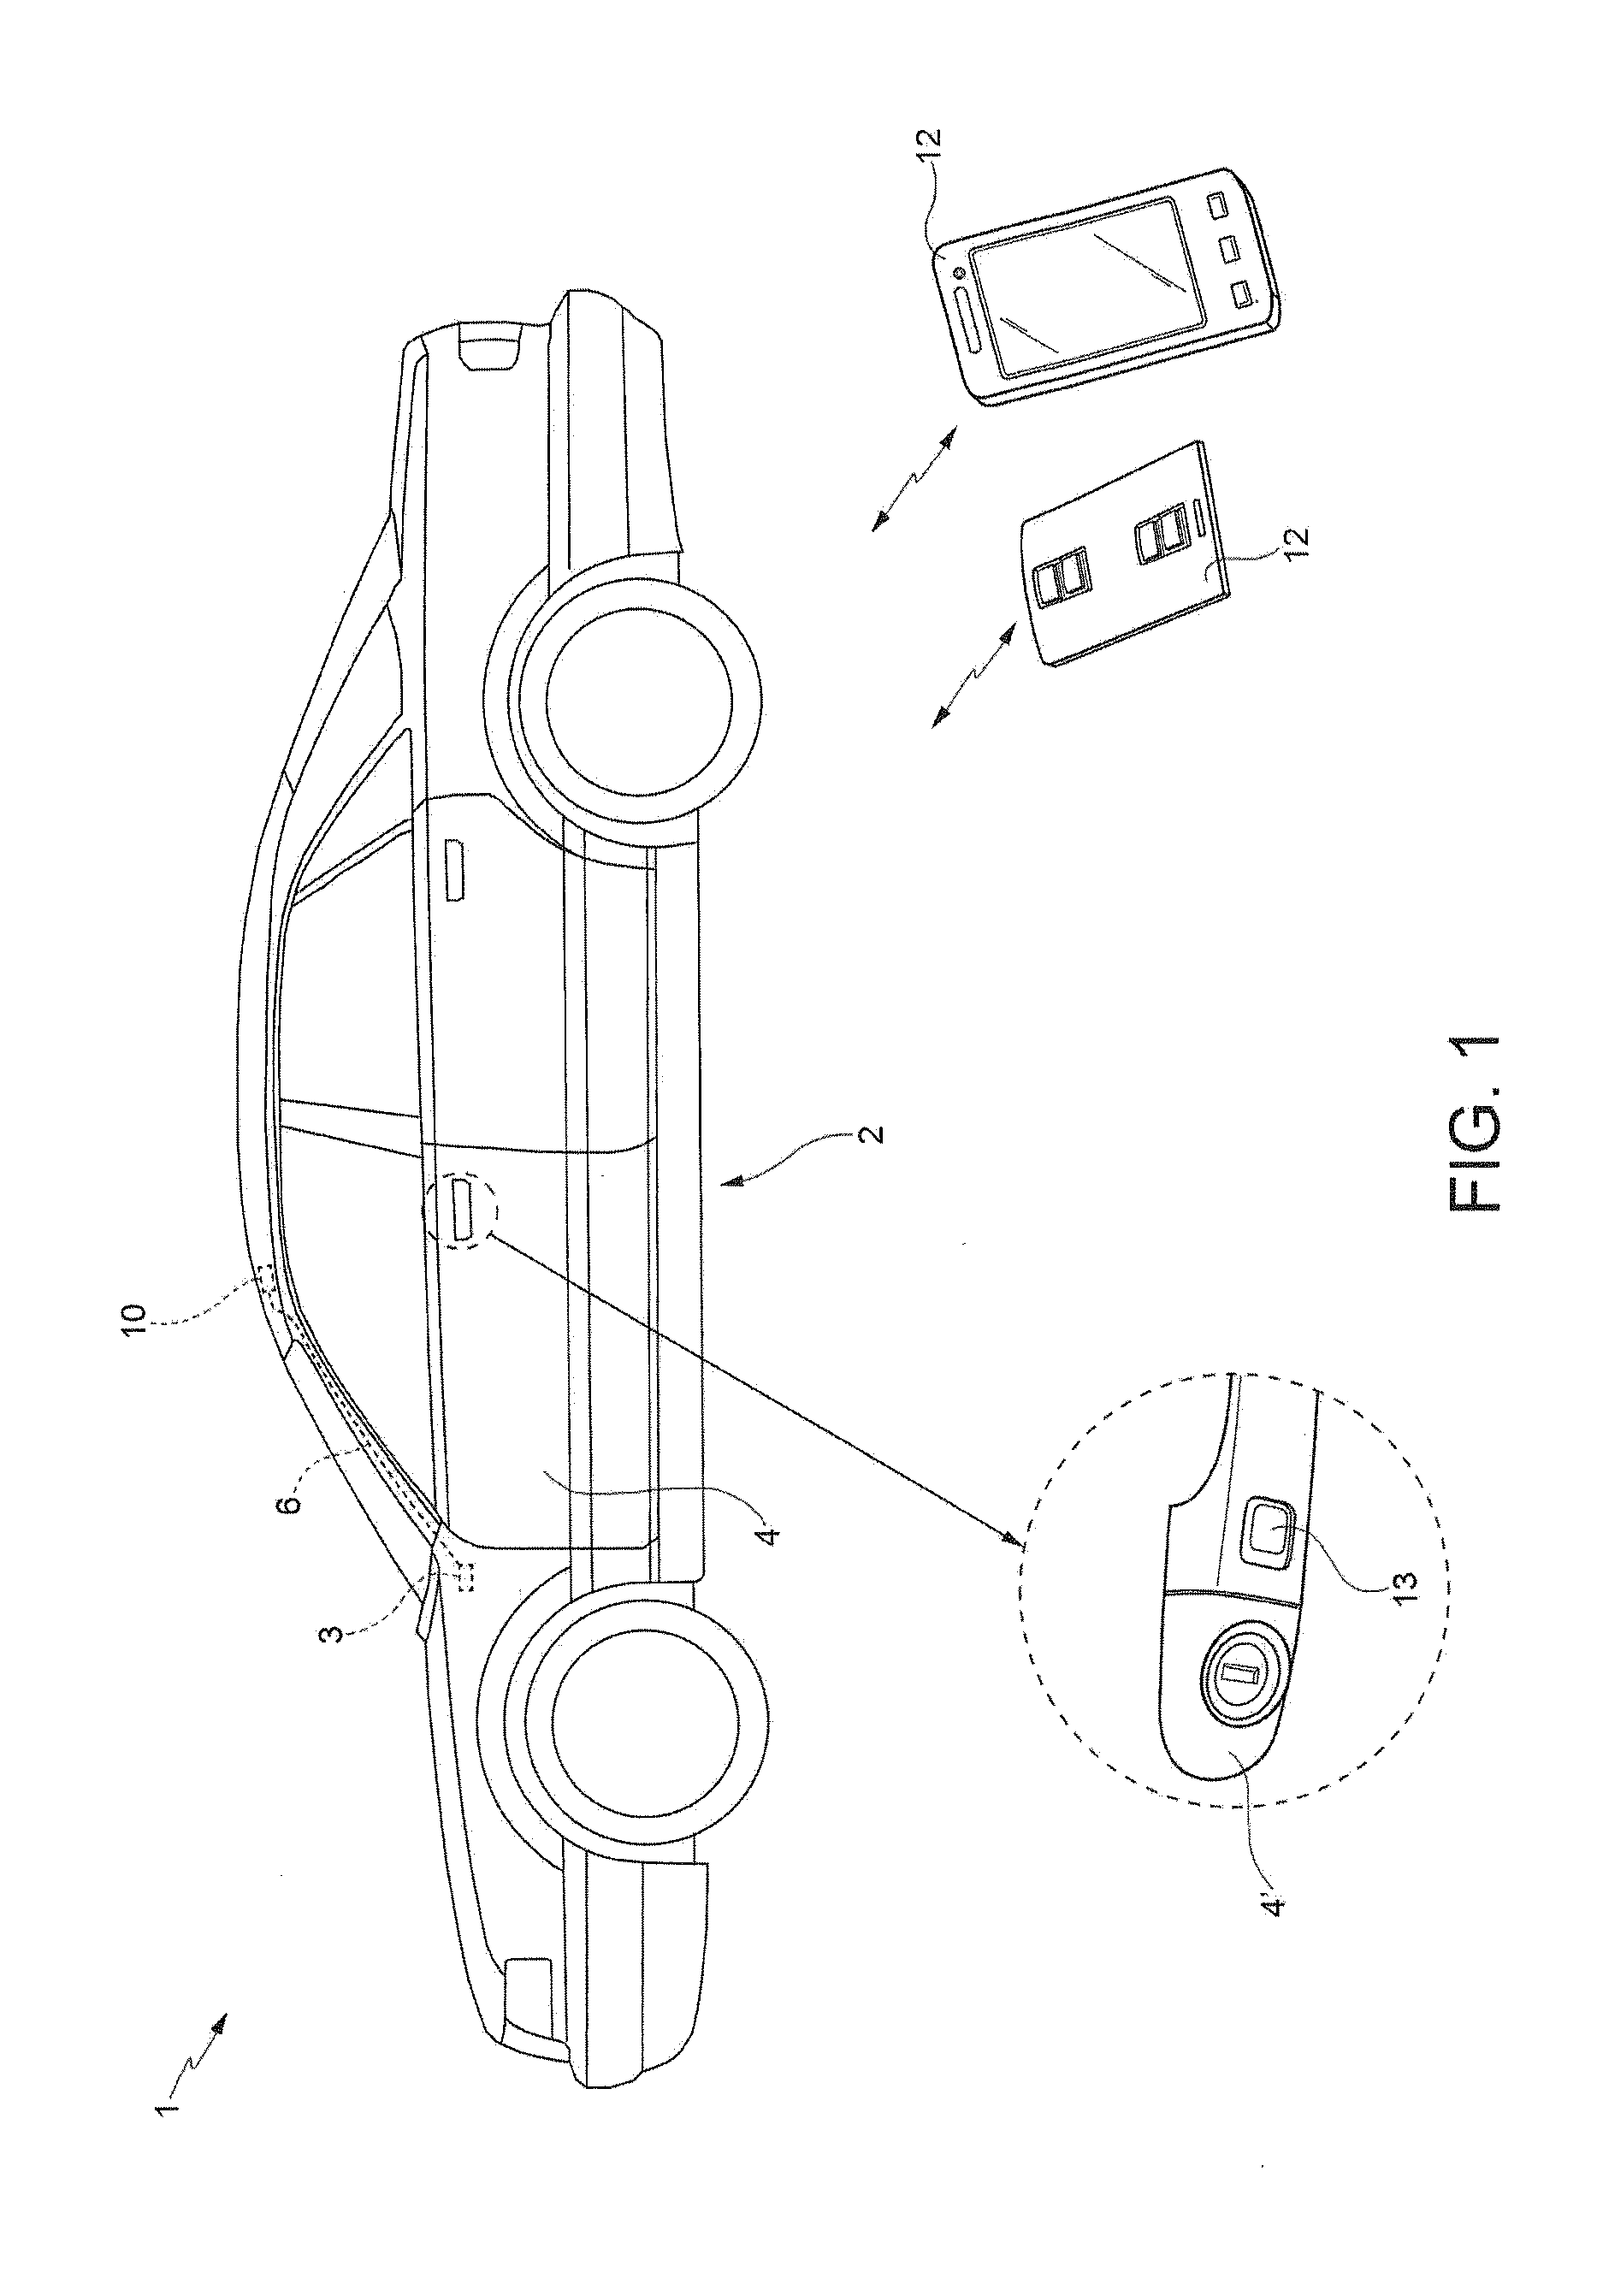 System for passive entry and passive start for a motor vehicle